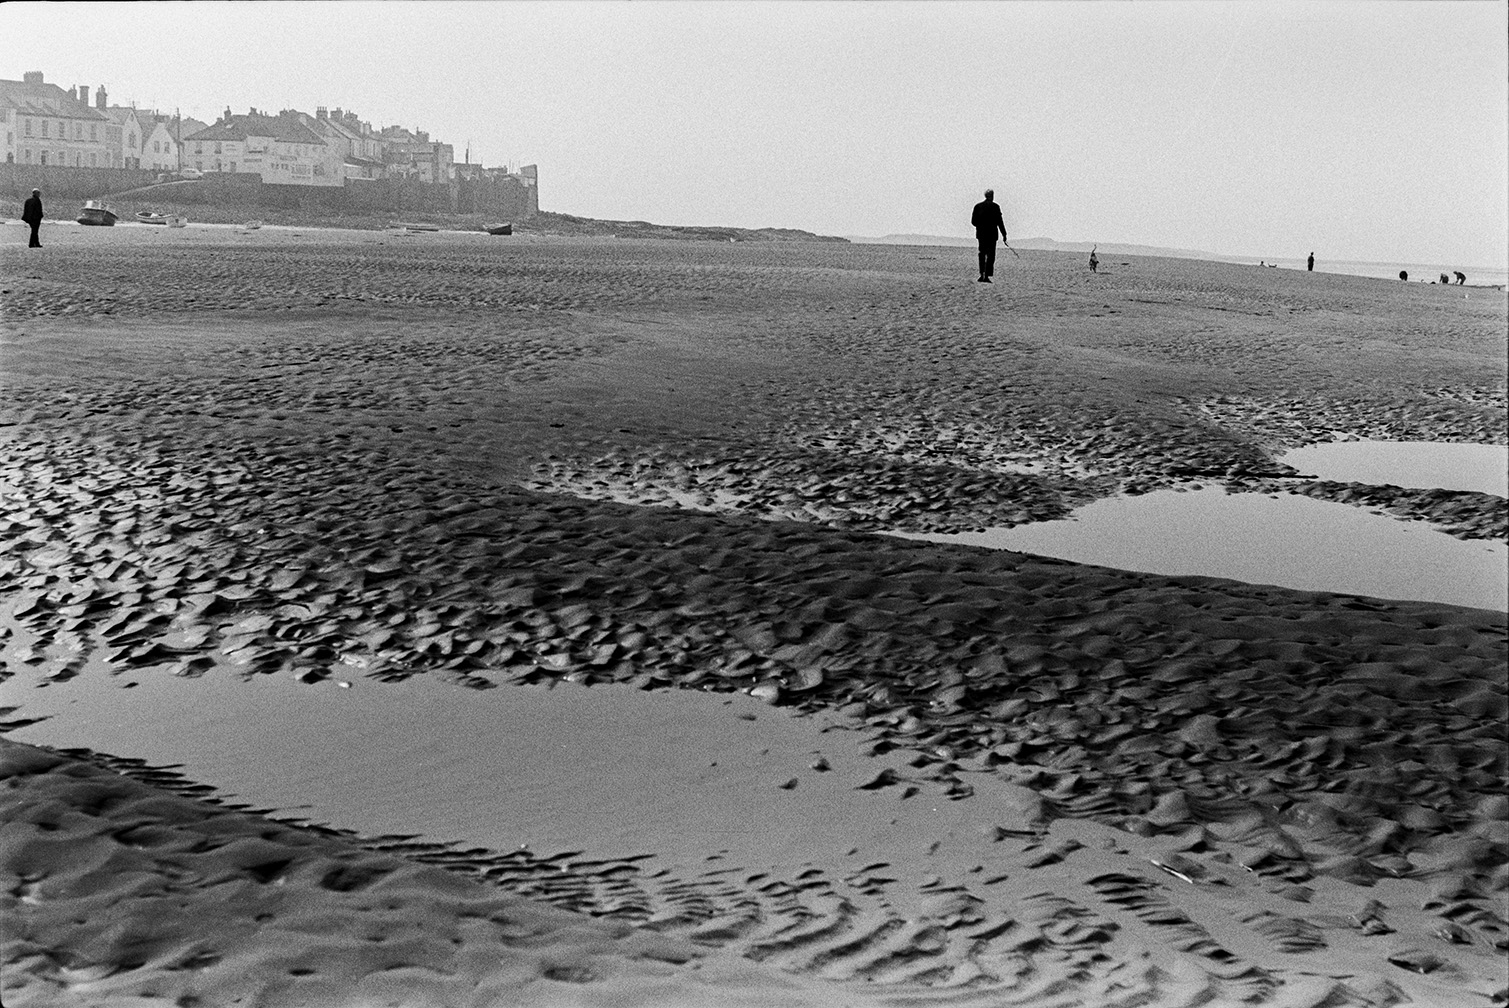 People walking along the beach after the tide has gone out at Appledore. The town can be seen in the background.